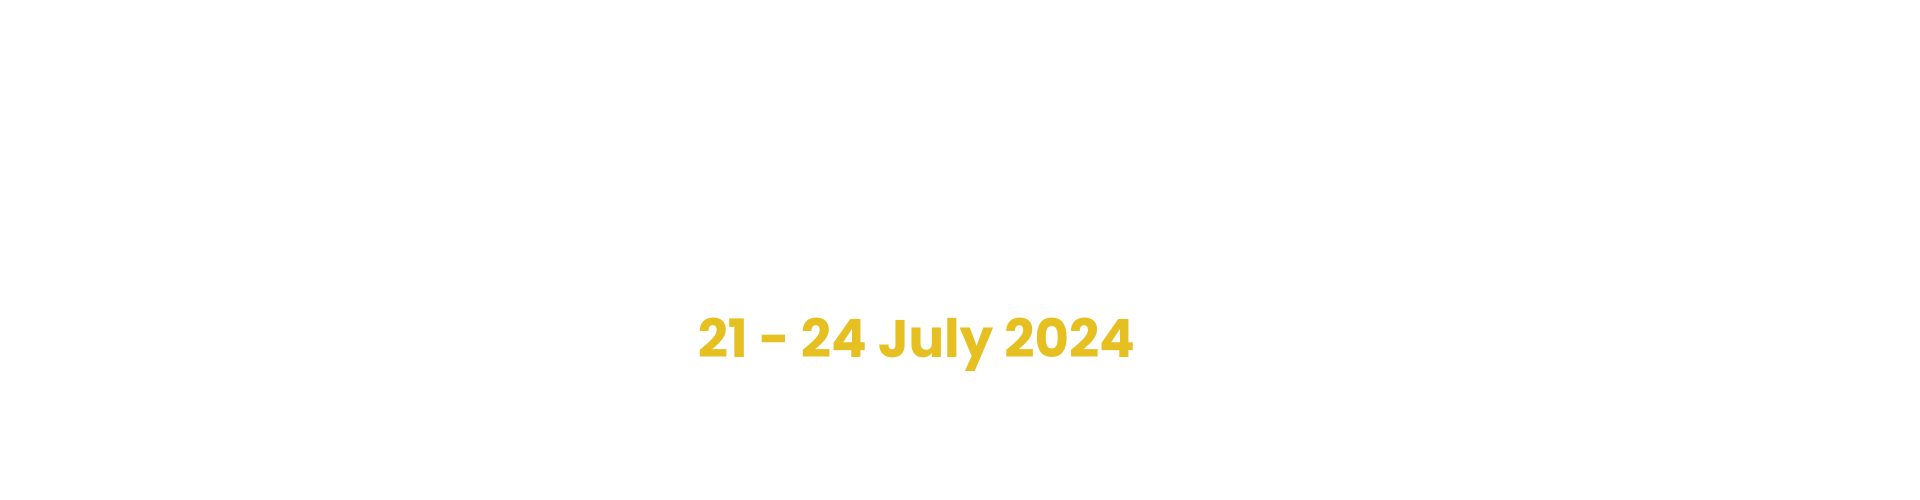 Home & Gift Buyers festival updated logo 3